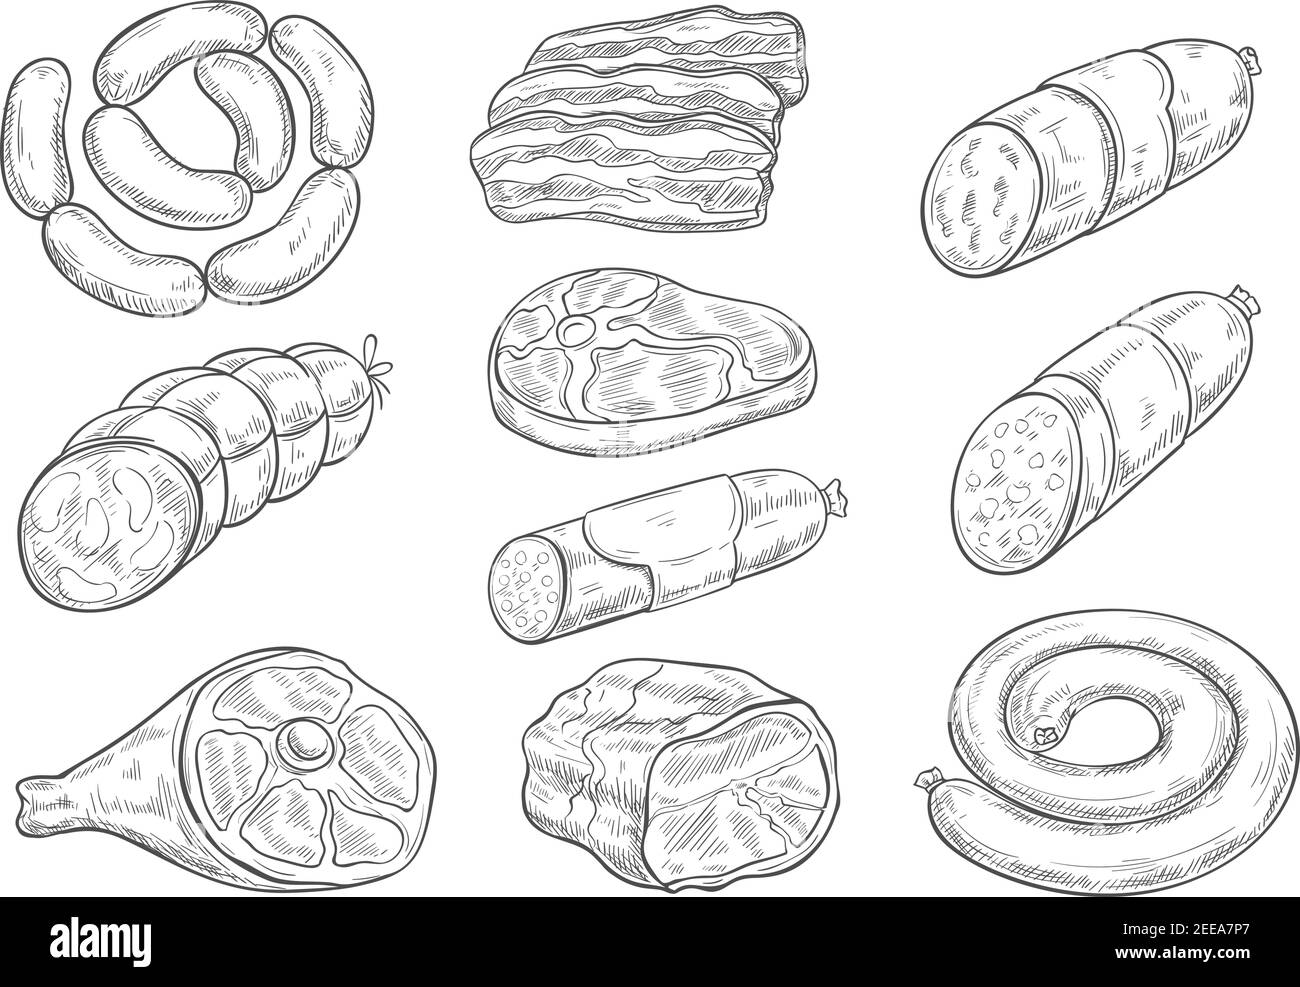 Meat products and butchery delicatessen vector sketches. Isolated bacon brisket, frankfurter or saveloy sausages, cervelat and pork lard, salami and s Stock Vector